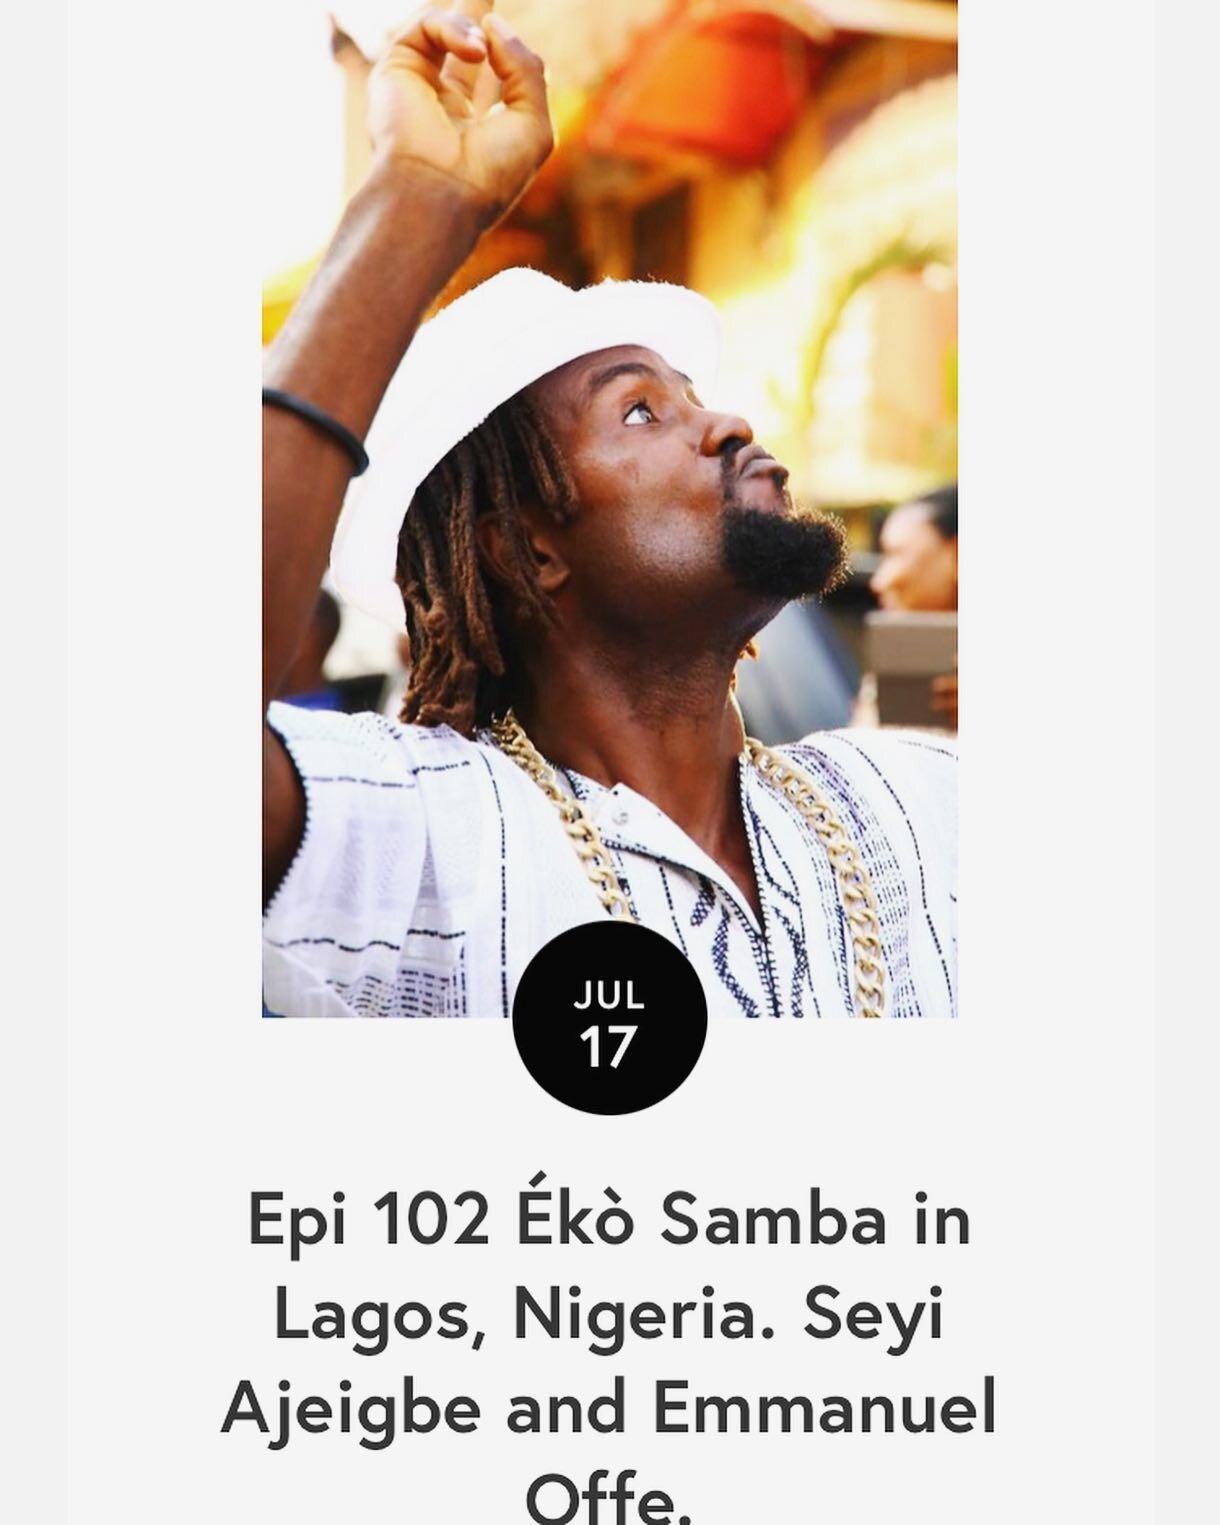 It is always a great pleasure when we are able to chat with people/groups that we've been admiring for a long time, and this is one of those times.  Eko Samba Community from Lagos, Nigeria, has been on our radar for a while, and it was so great to sp